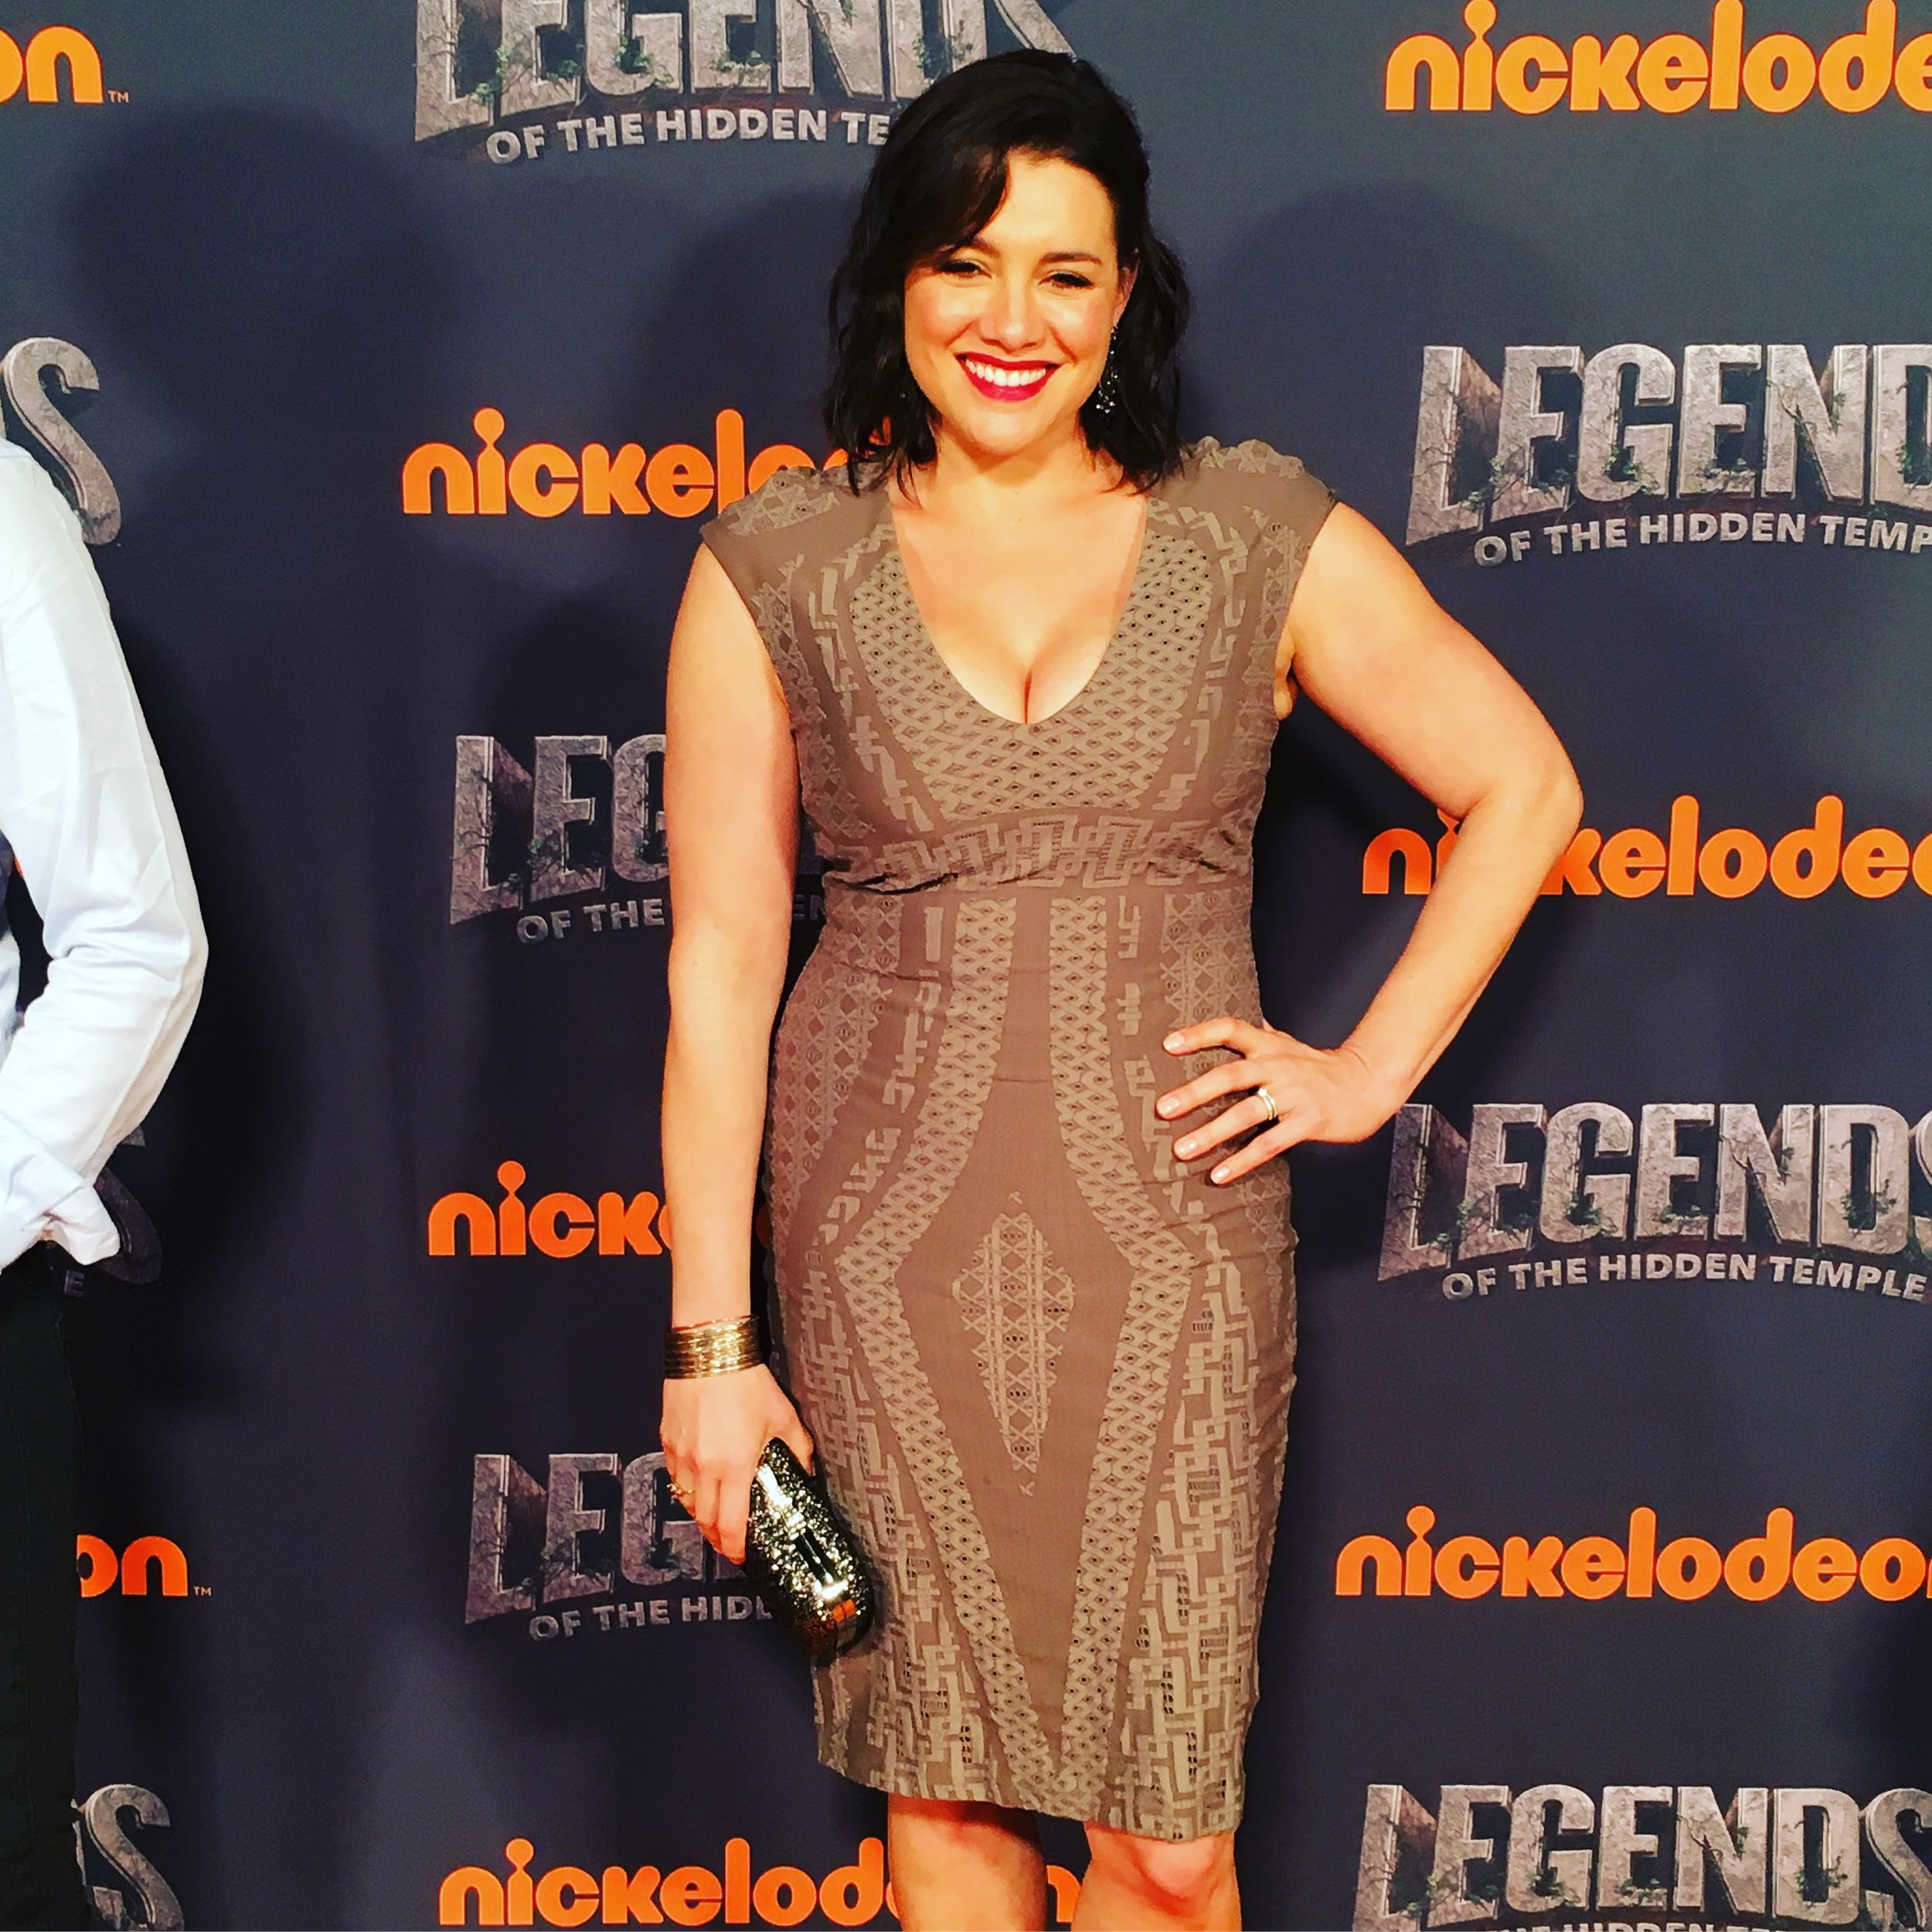 Catia Ojeda on the red carpet at the premiere of "Legends of the Hidden Temple."